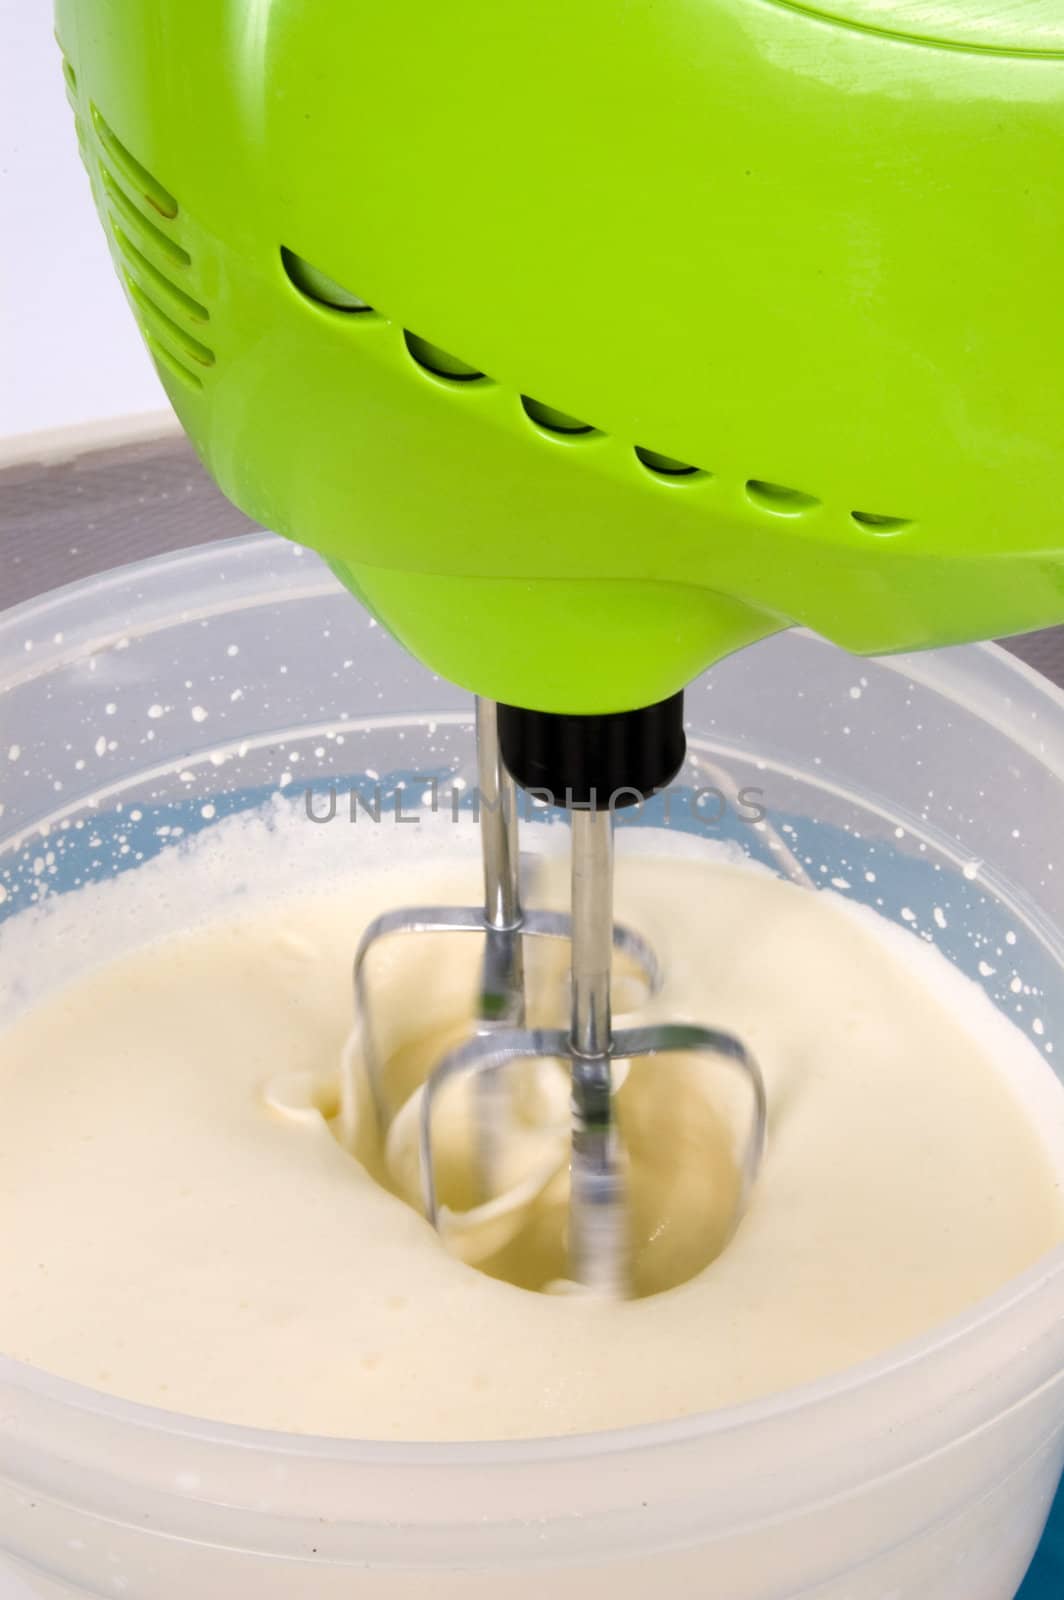 mixermachine is making whipped cream by ladyminnie